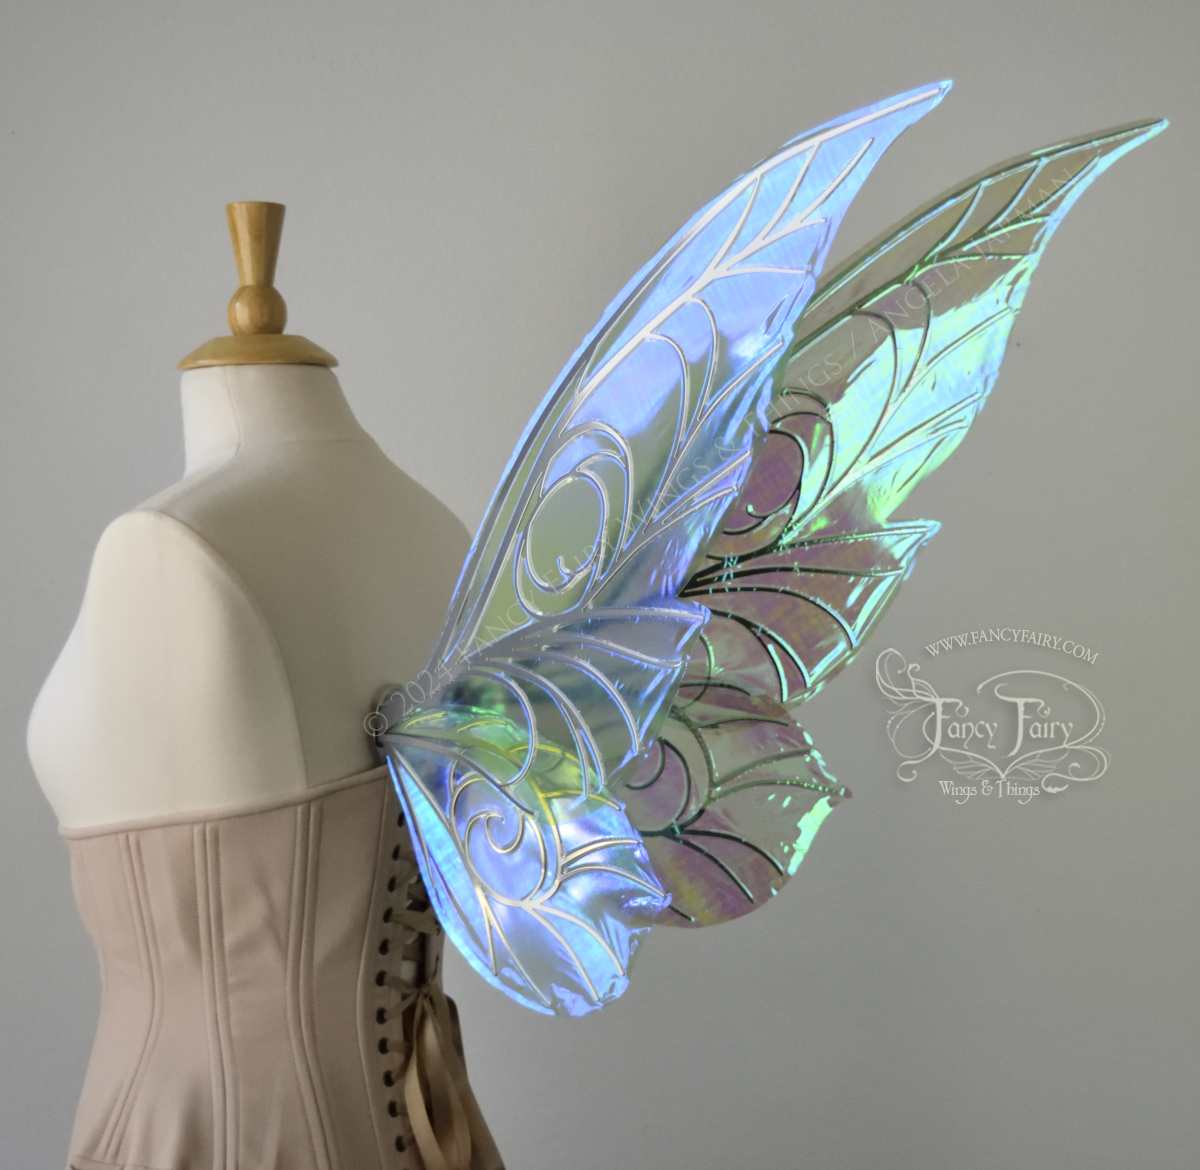 Back 3/4 view of green iridescent Tinker Bell inspired fairy wings with swirly silver veins, displayed on a dress form